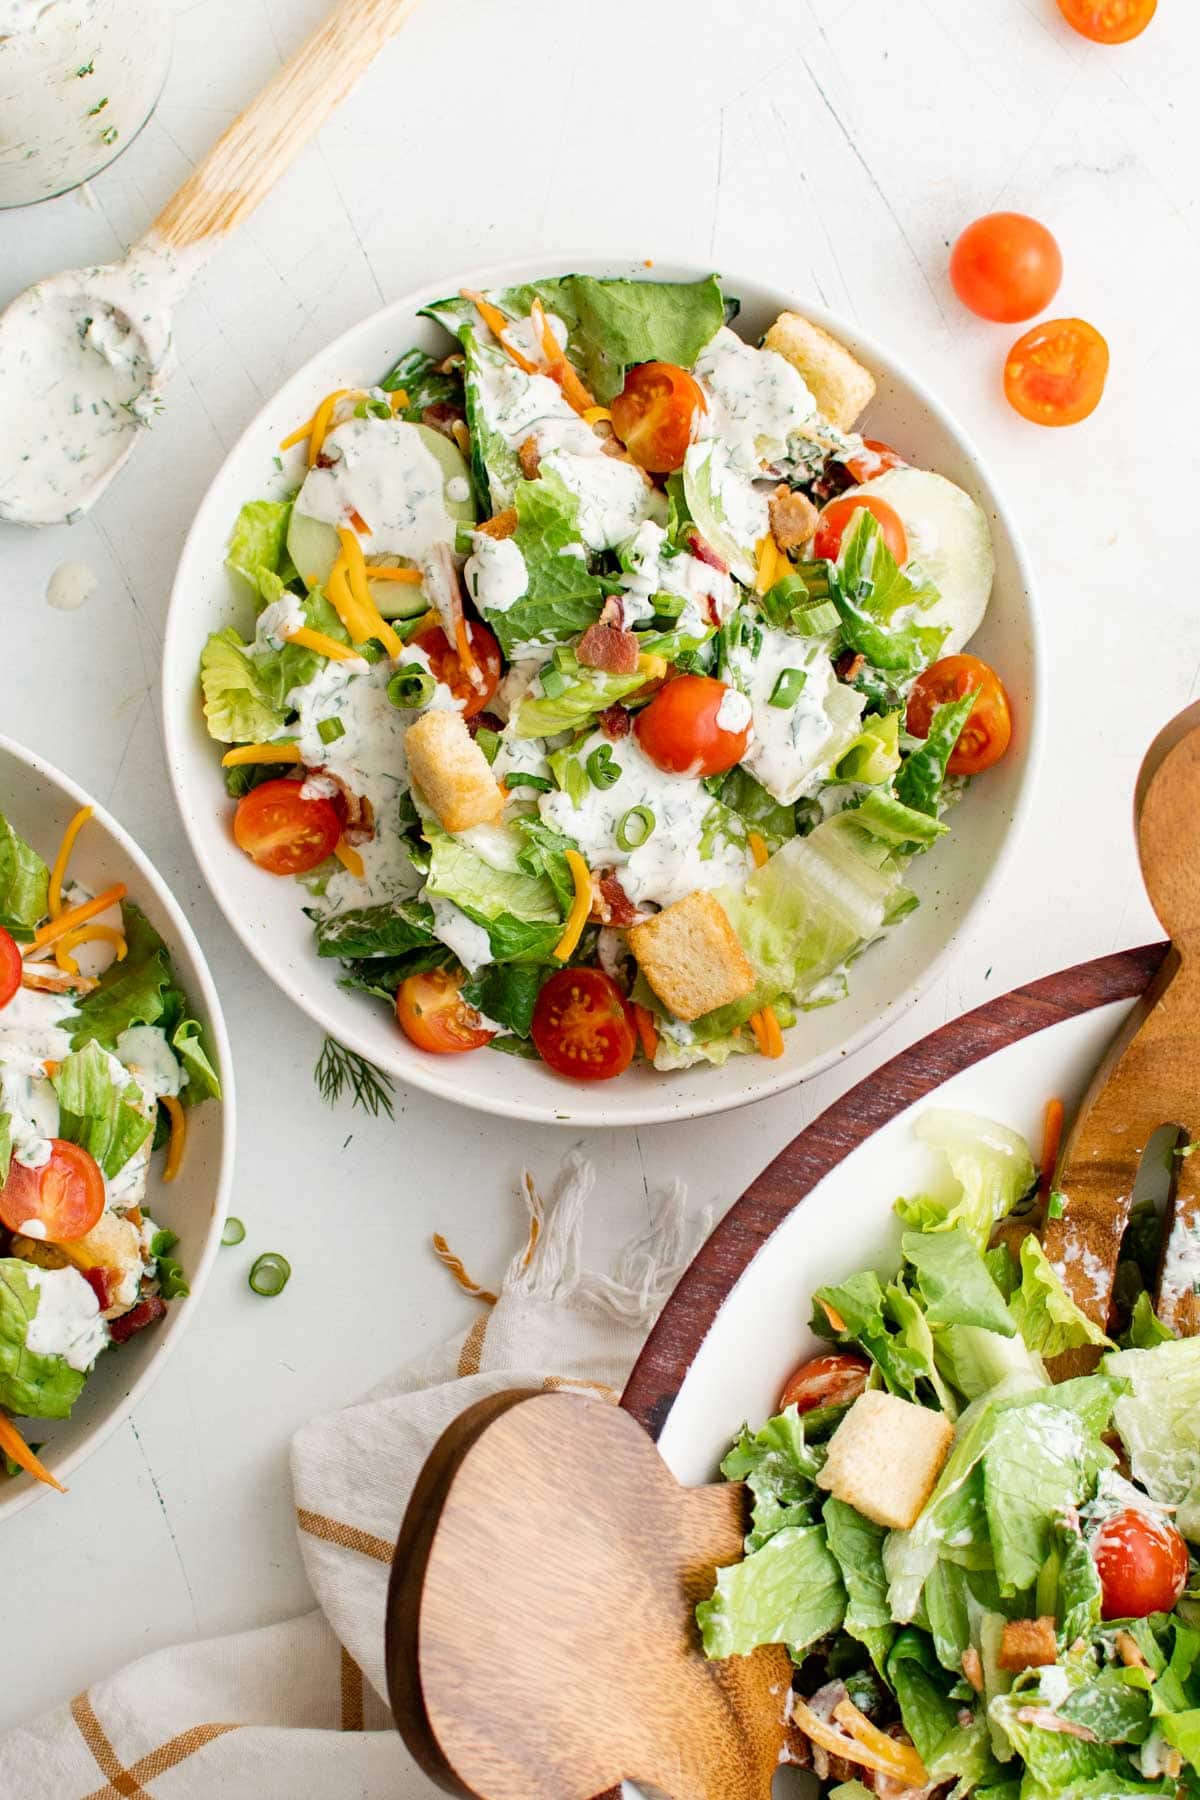 Lettuce in a bowl with tomatoes, carrots, cheese and ranch.